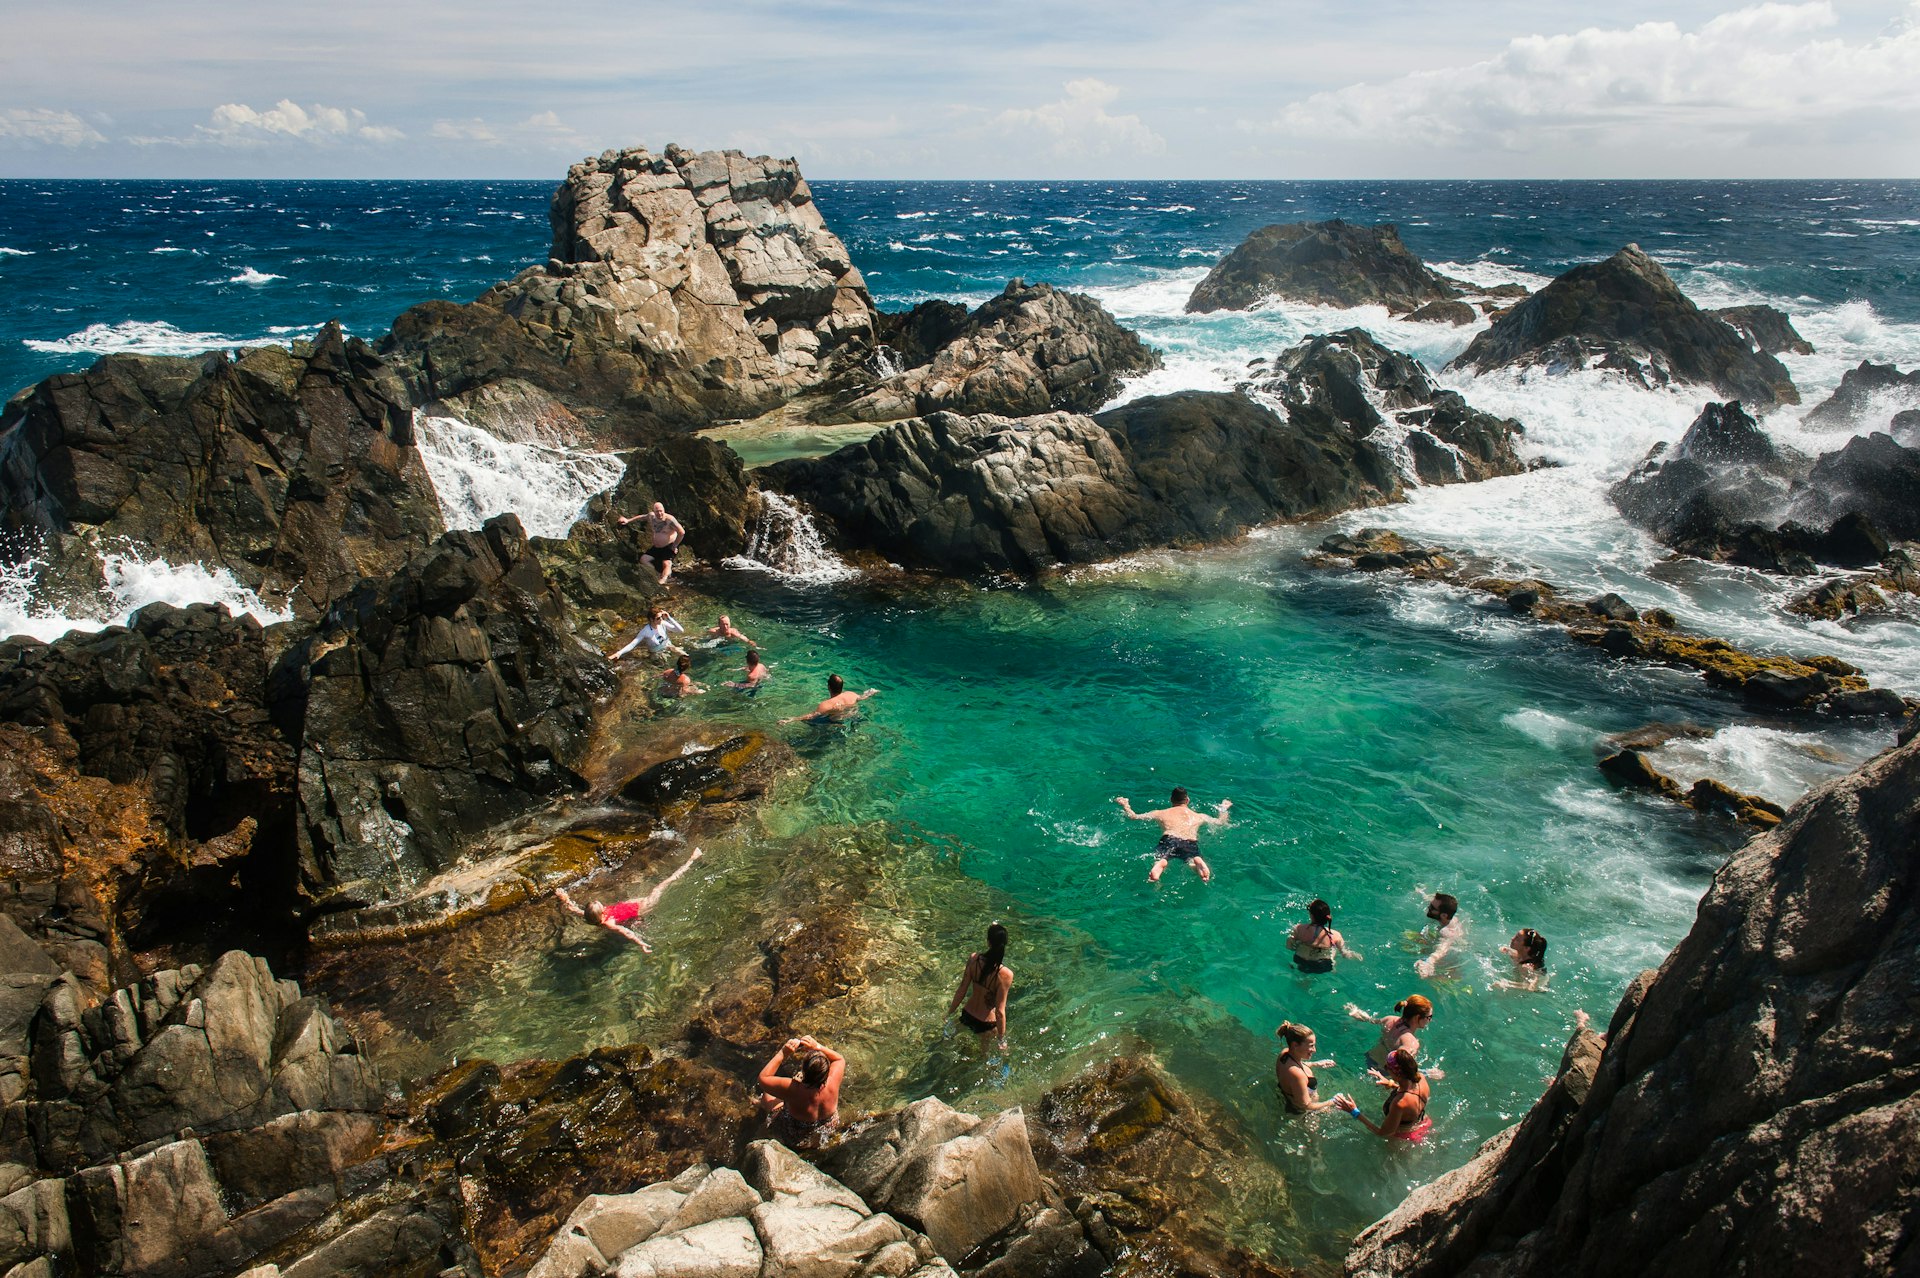 Visitors swimming in a protected rock pool on the north coast of Aruba.